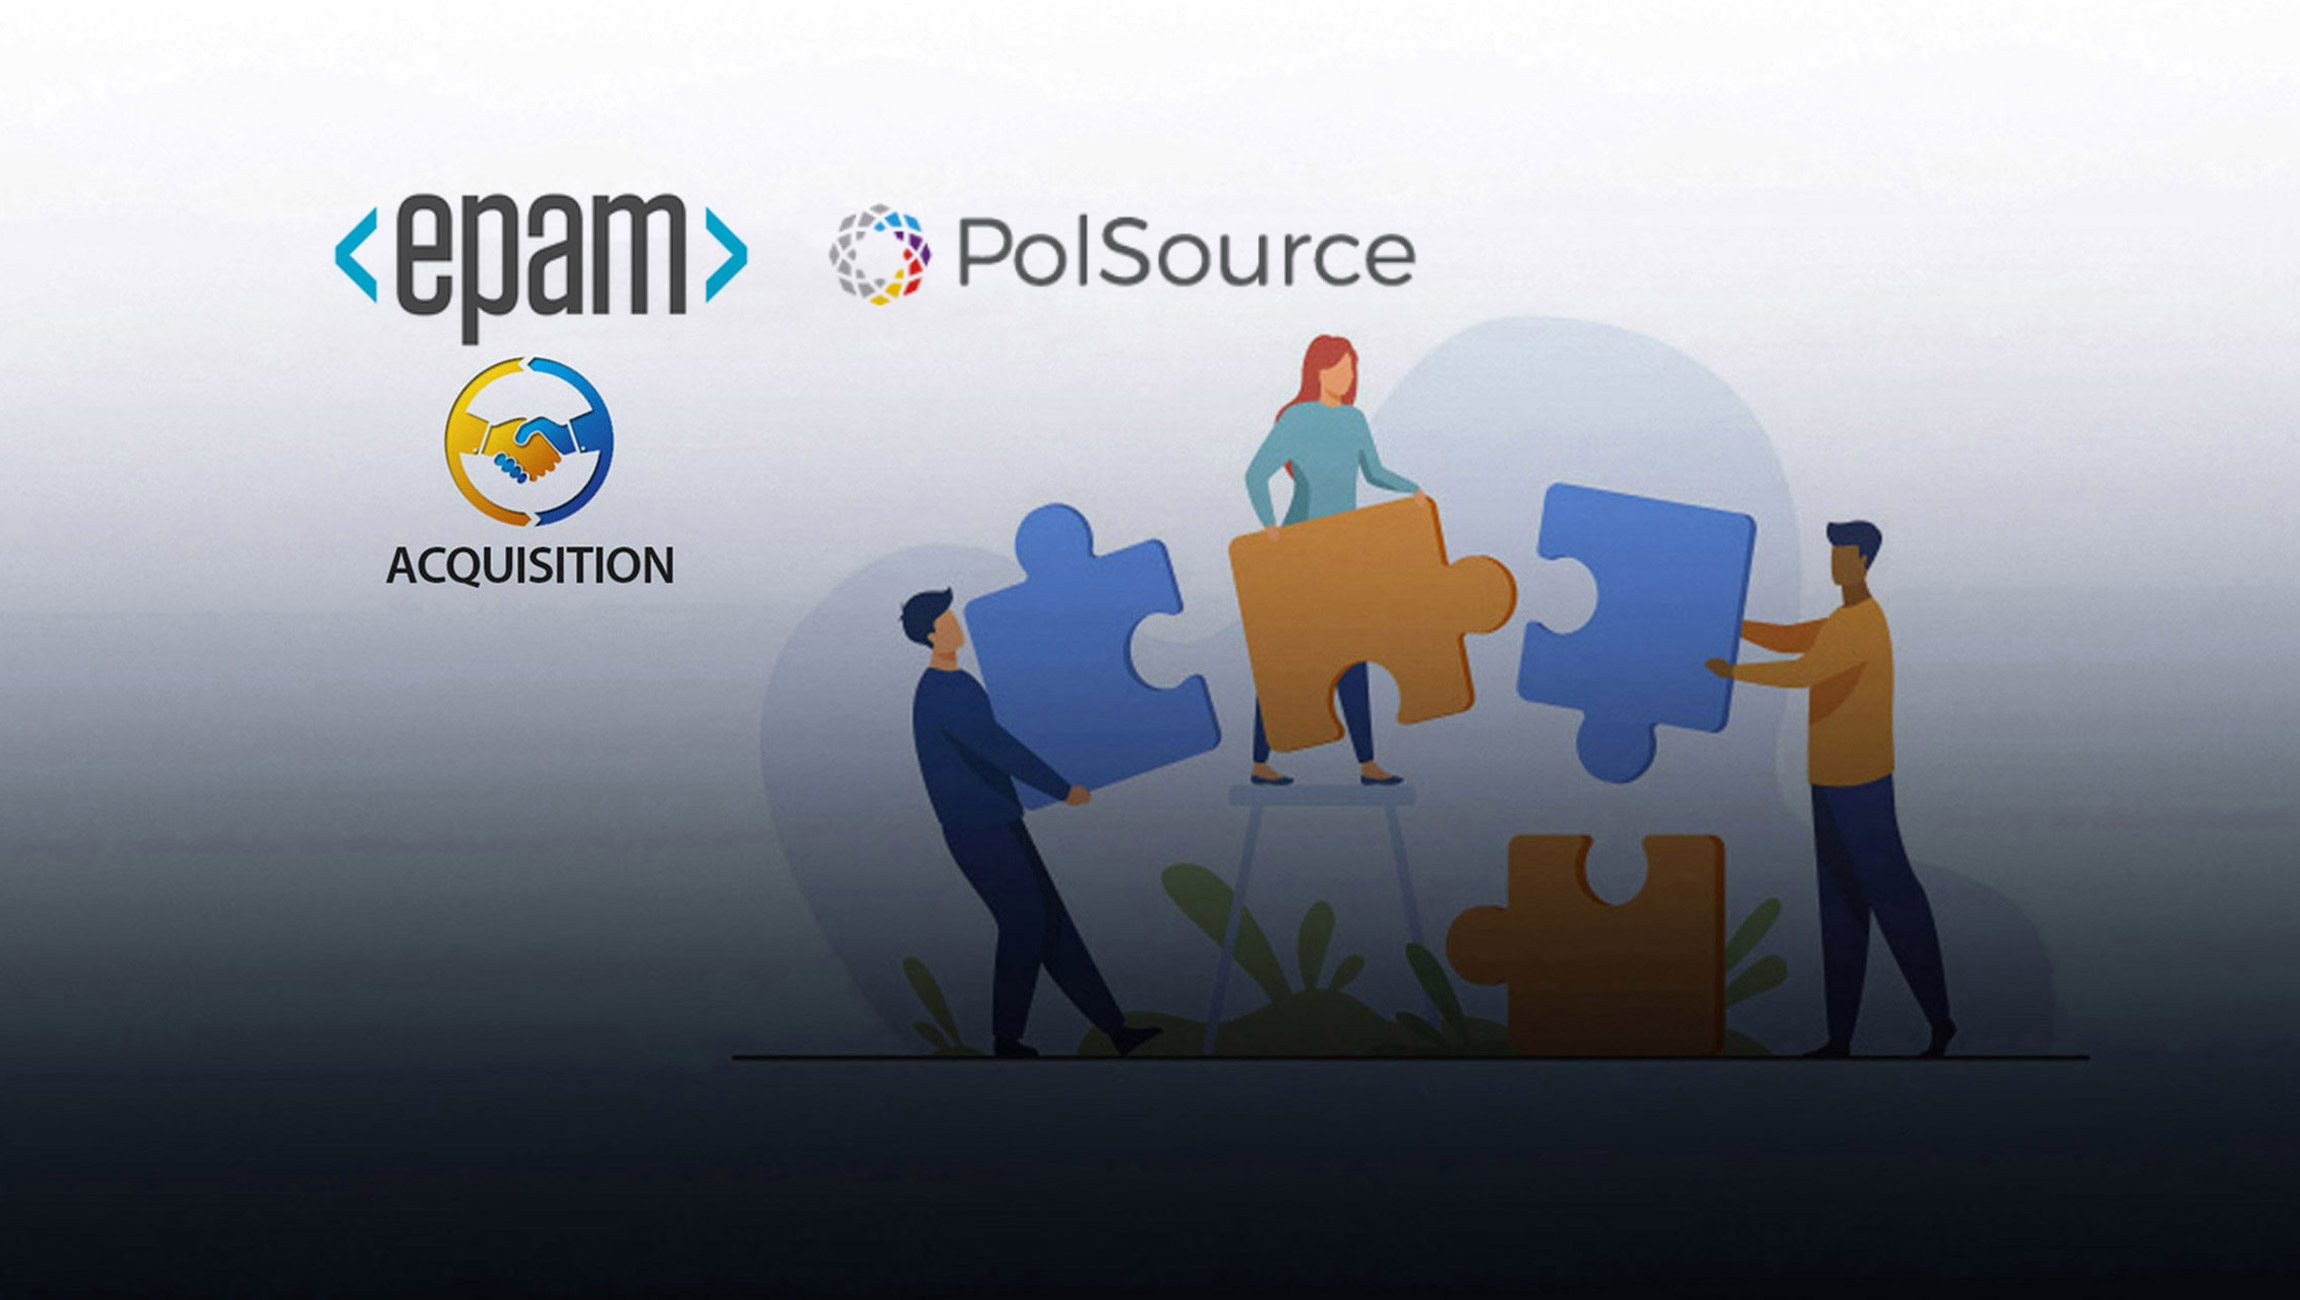 EPAM Announces Agreement To Acquire PolSource